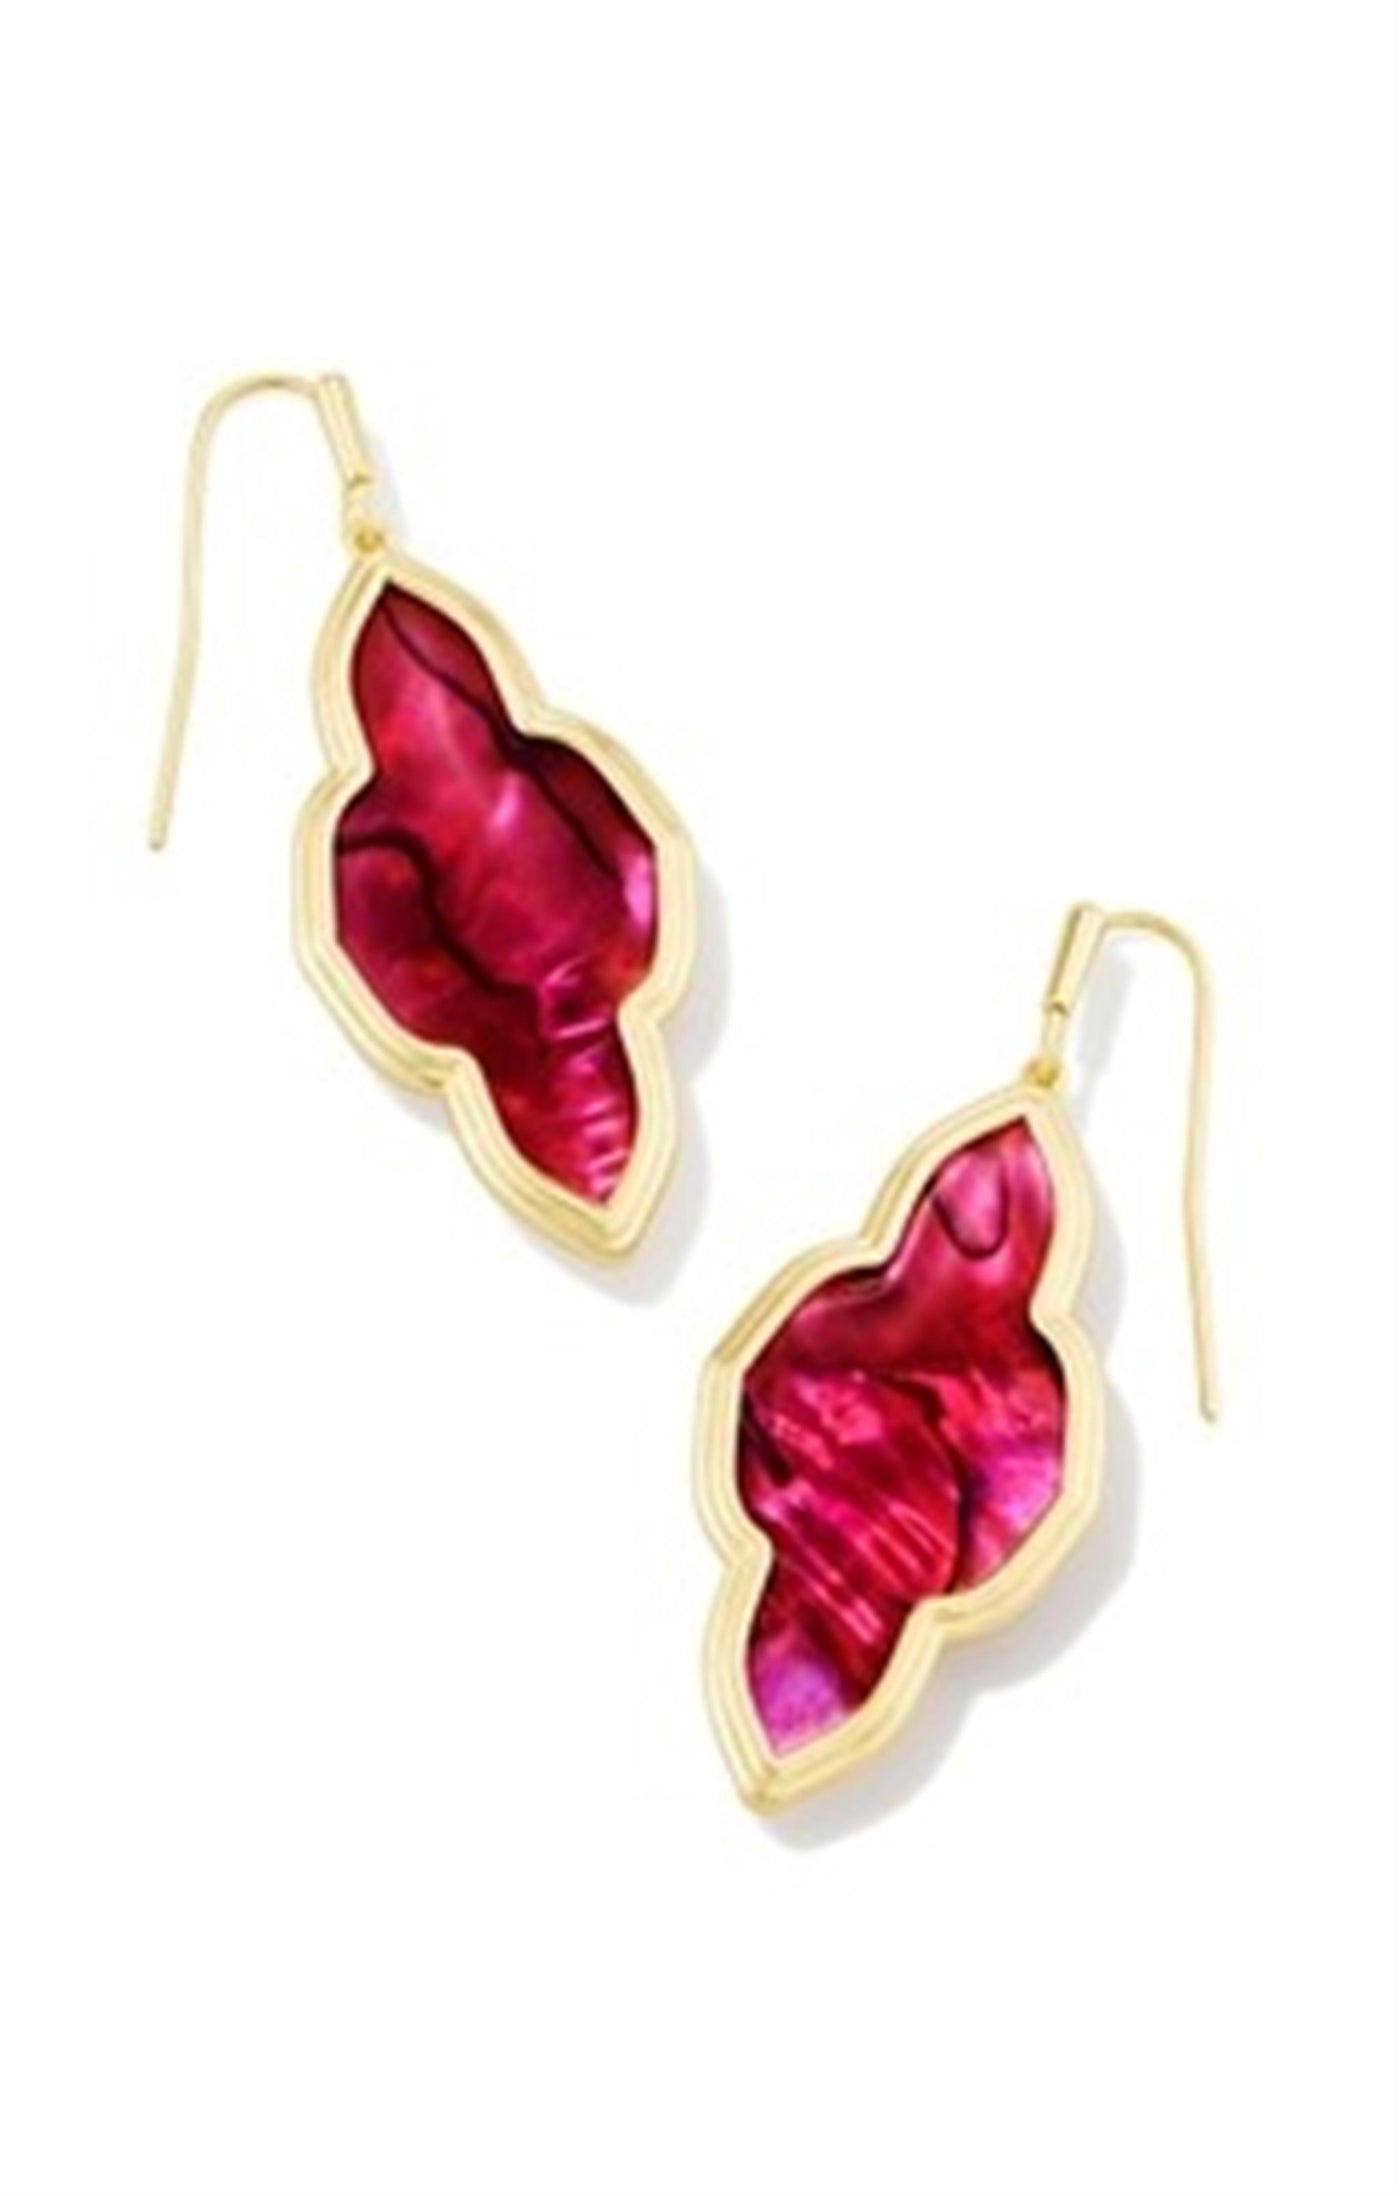 Gold Tone Earrings Featuring Burgundy Illusion by Kendra Scott